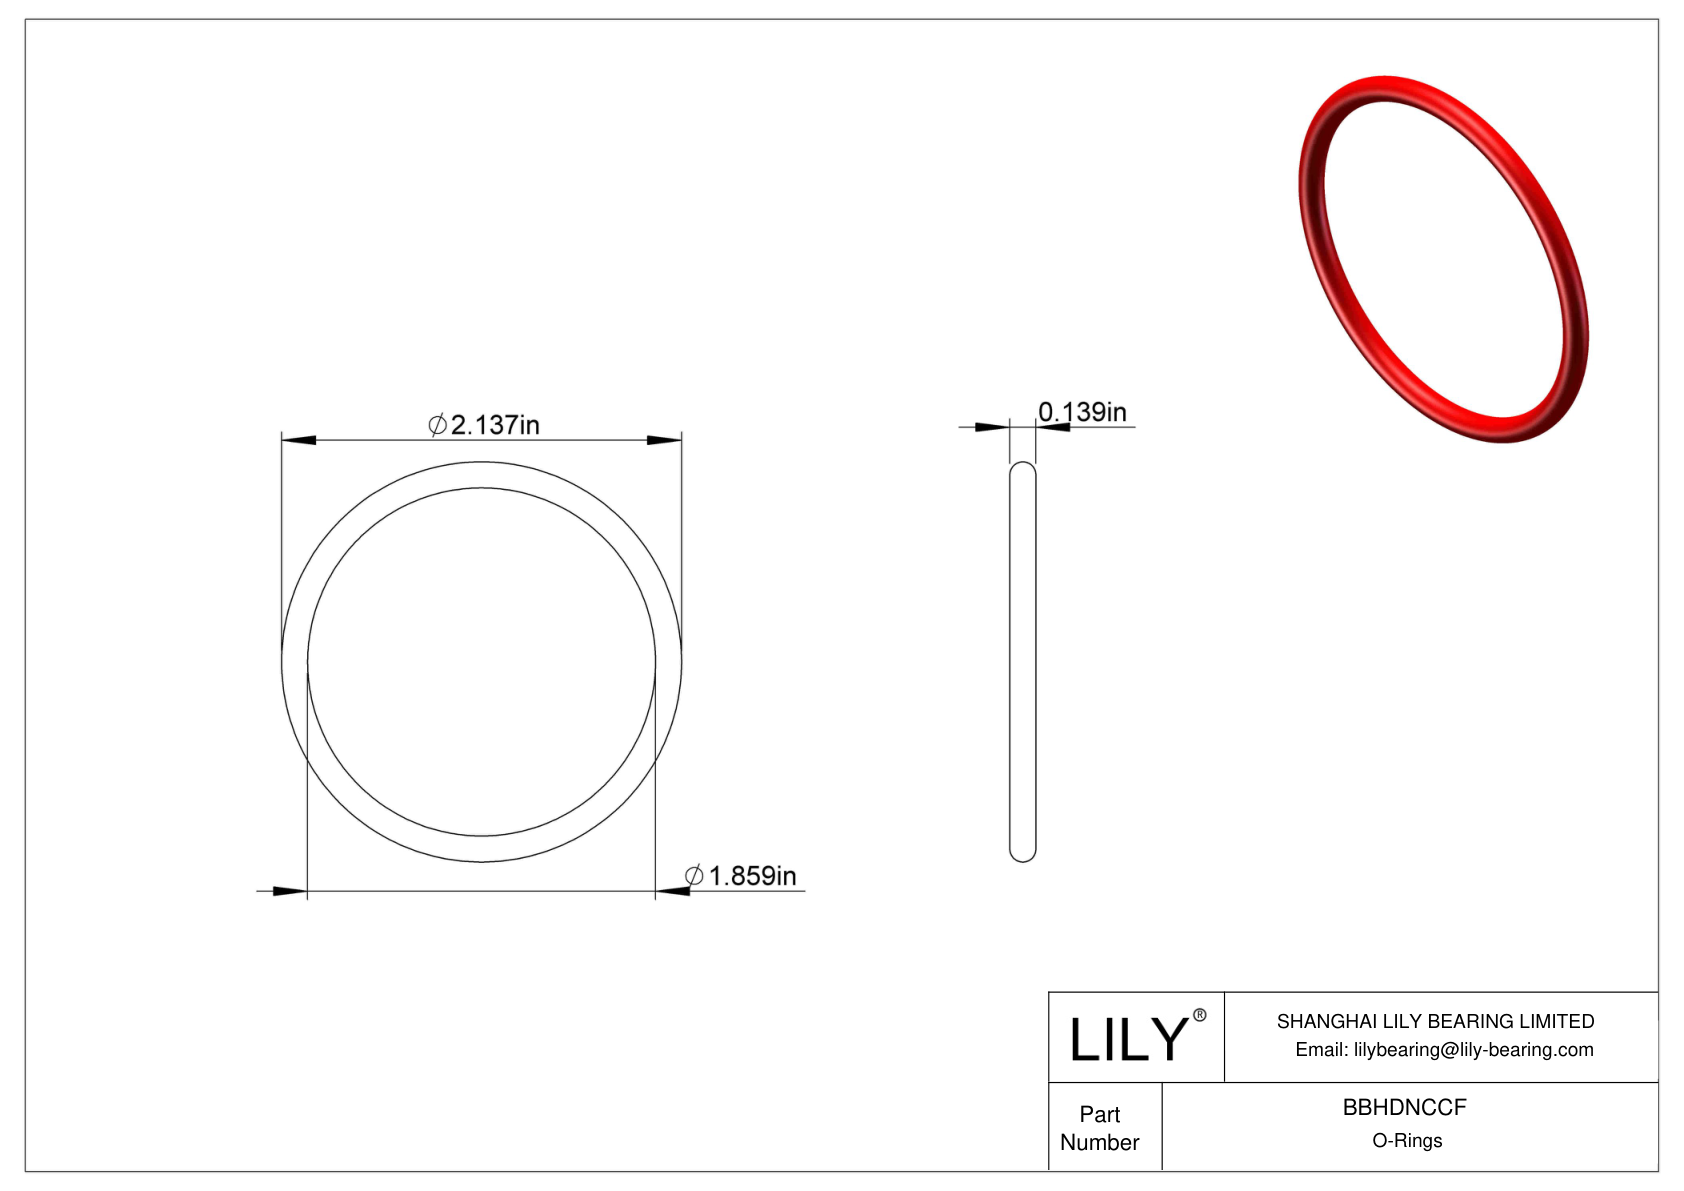 BBHDNCCF High Temperature O-Rings Round cad drawing